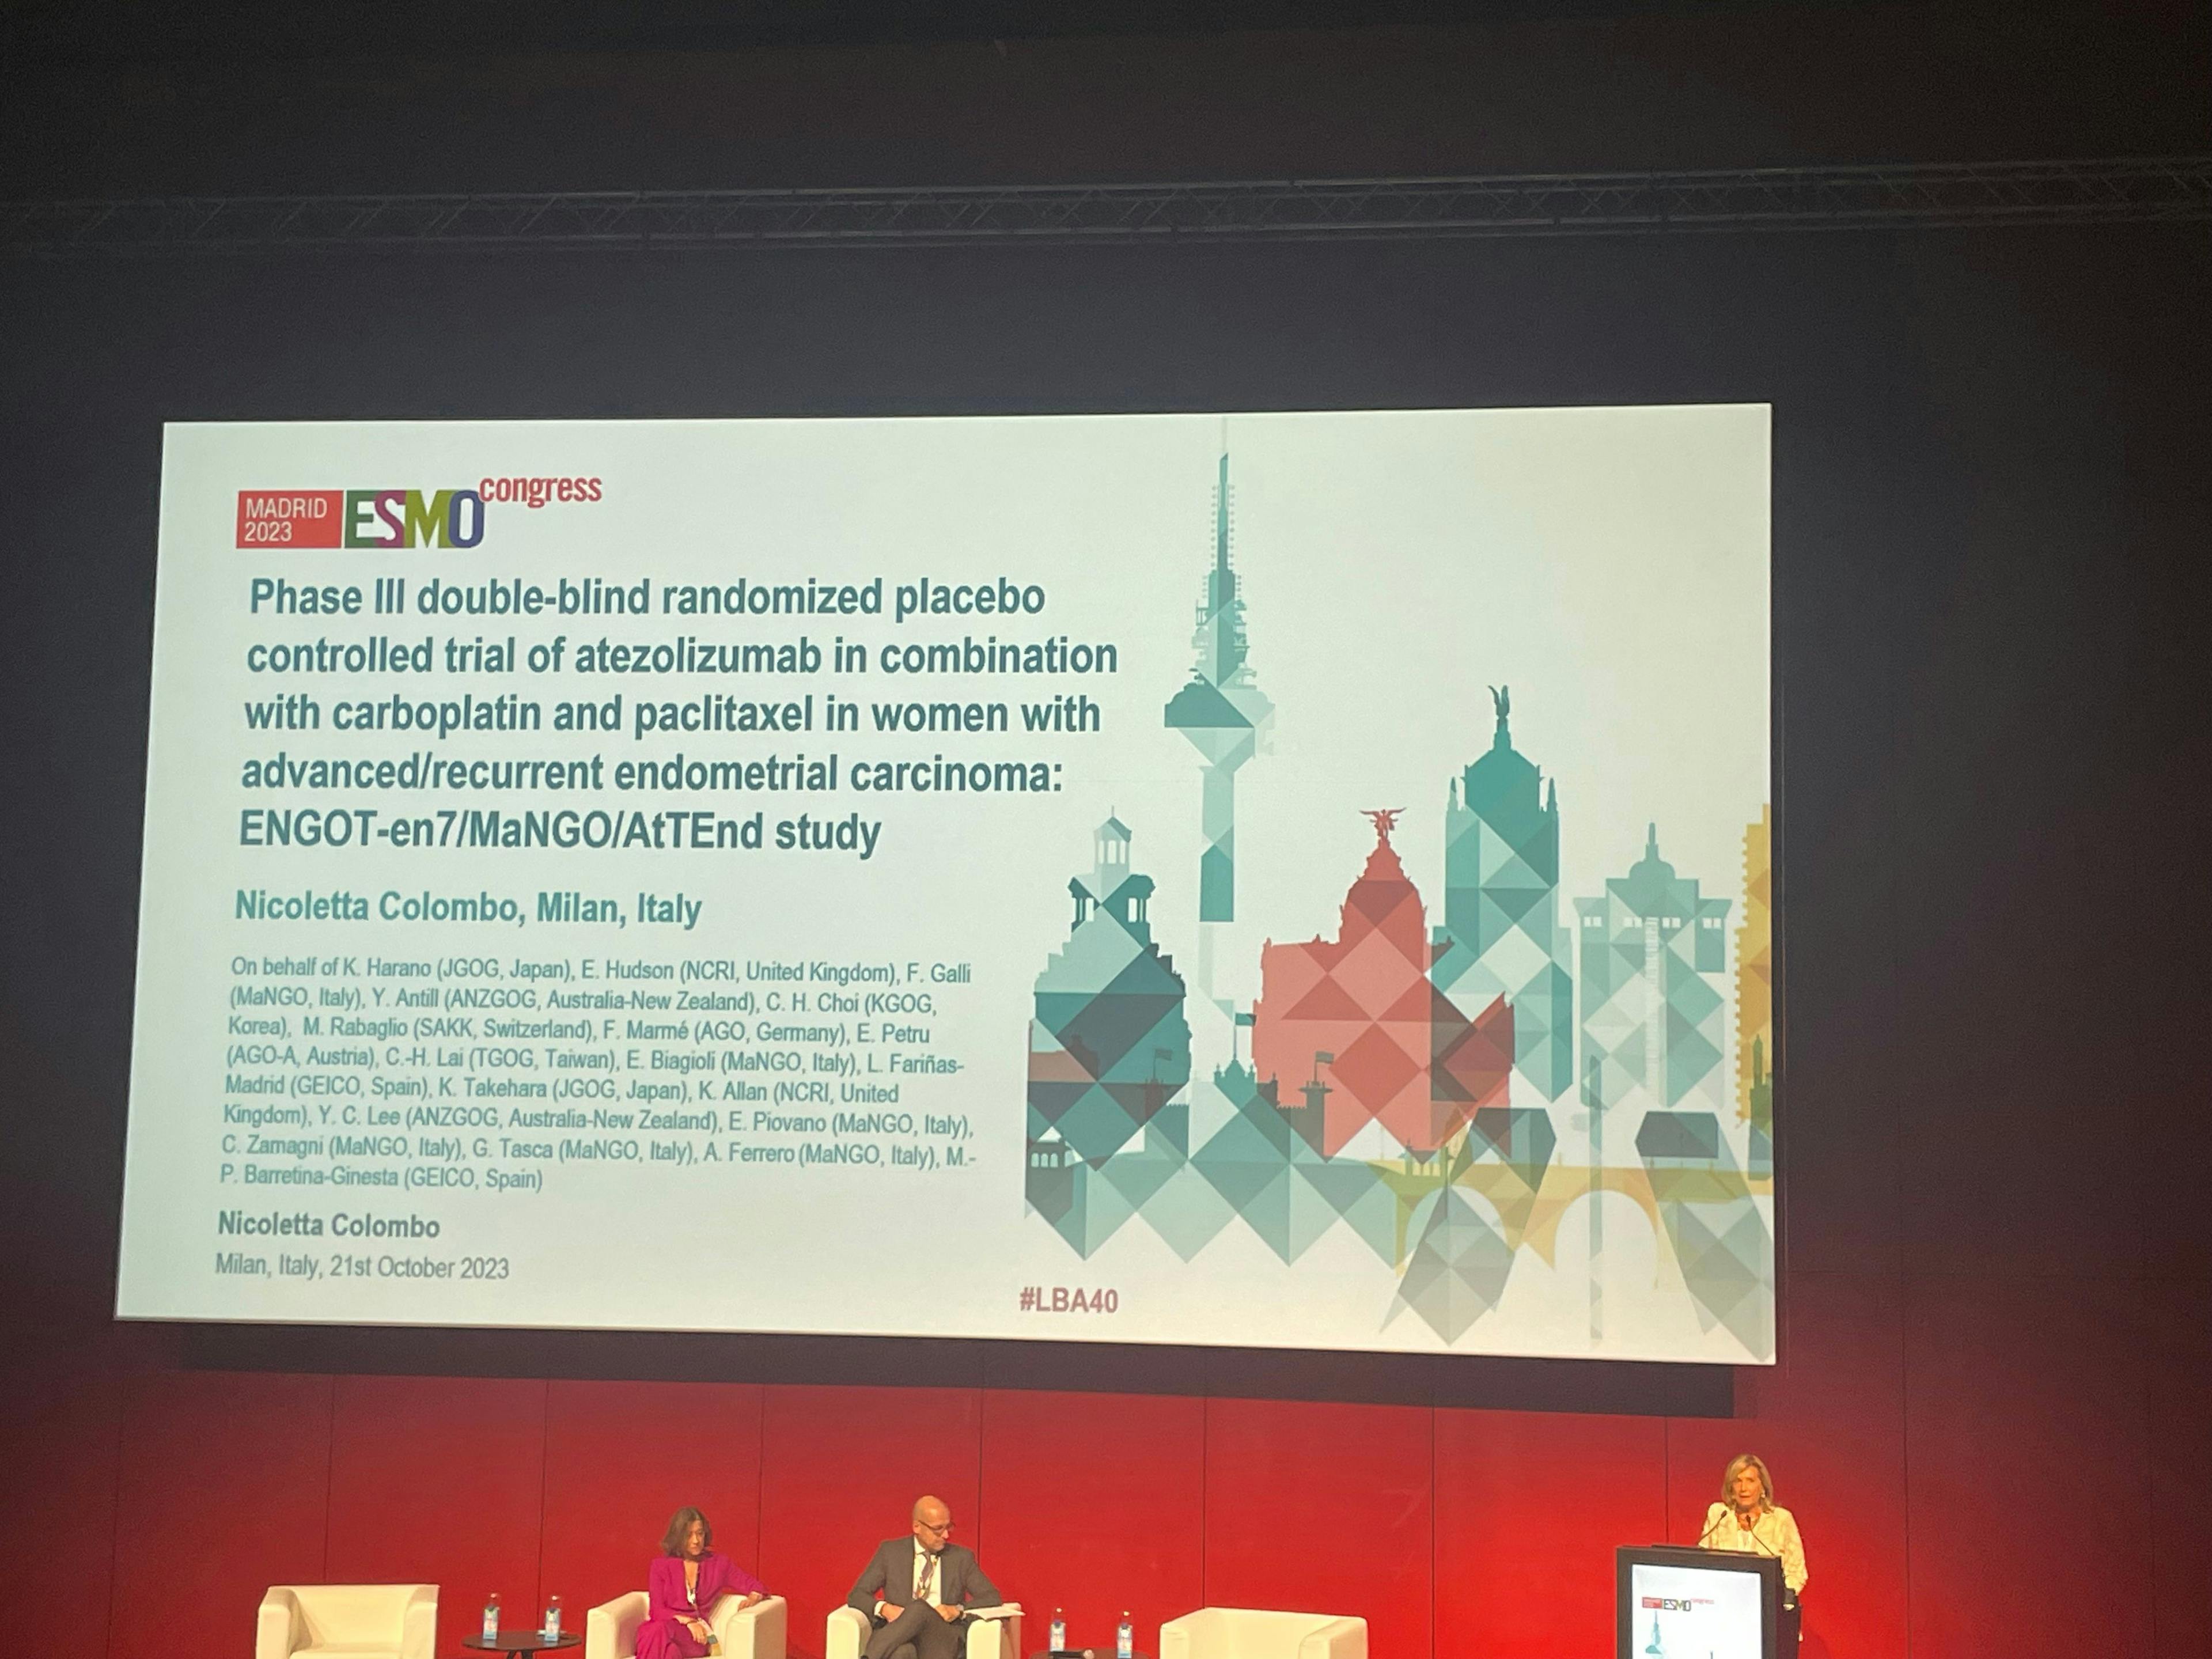 Nicoletta Colombo, MD, presenting LBA40: "Phase III double-blind randomized placebo controlled trial of atezolizumab in combination with carboplatin and paclitaxel in women with advanced/recurrent endometrial carcinoma" at ESMO Congress 2023